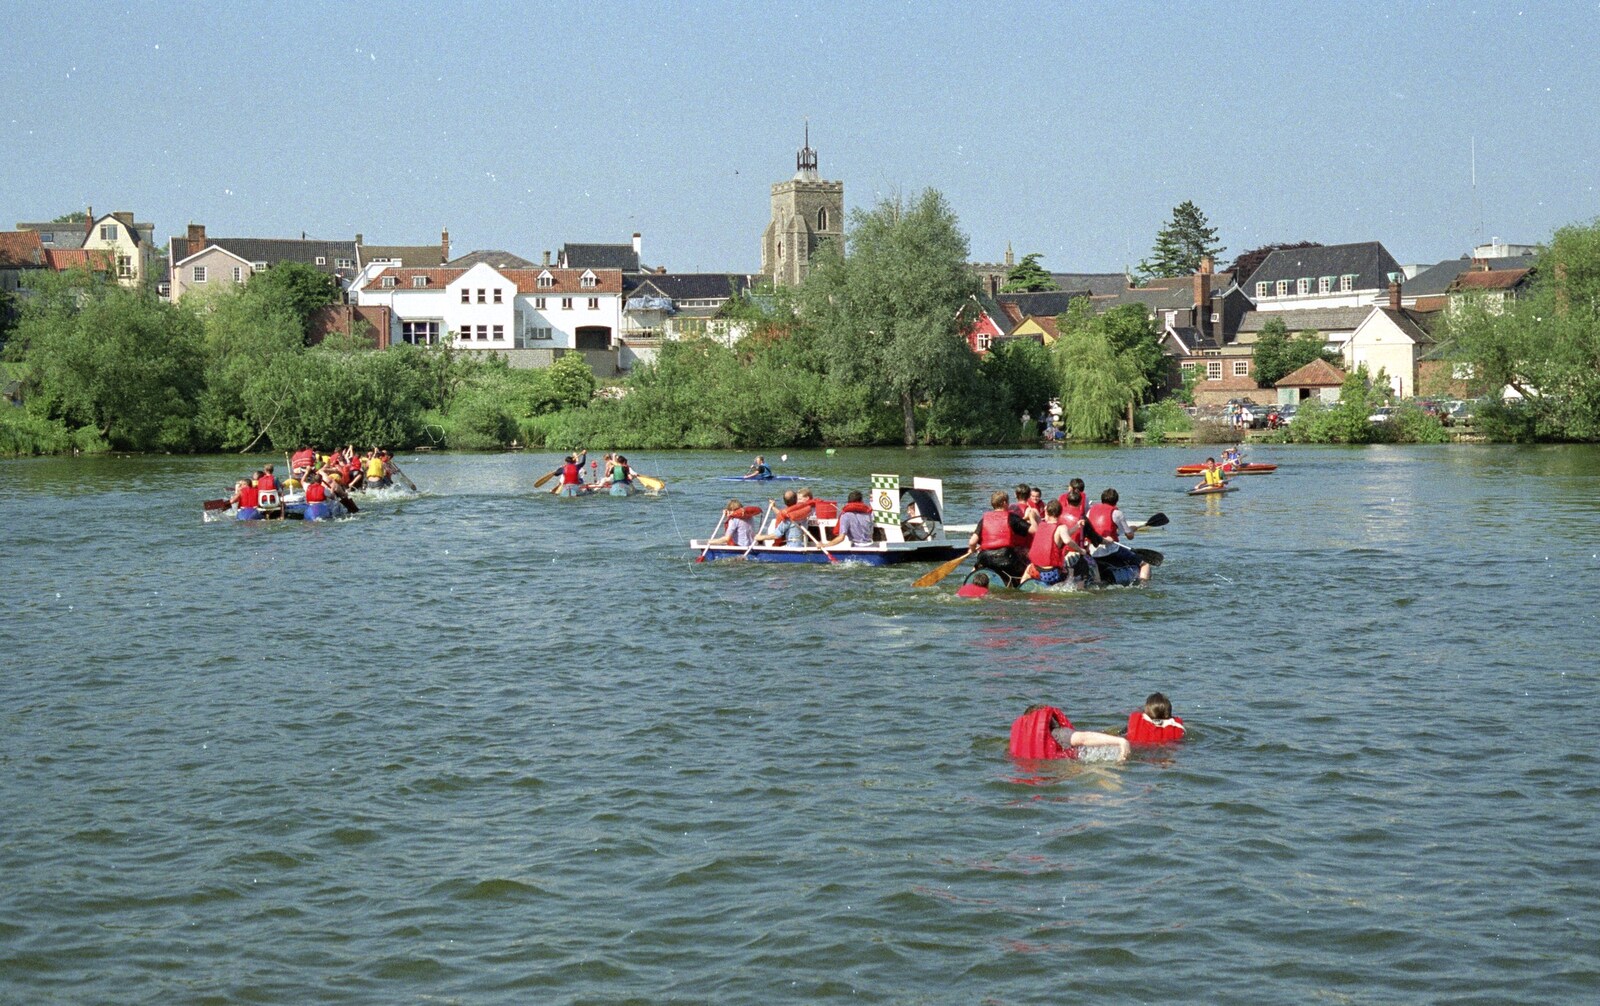 More bobbing about on the Mere from The Diss Raft Race, Diss Mere, Norfolk - 6th July 1991